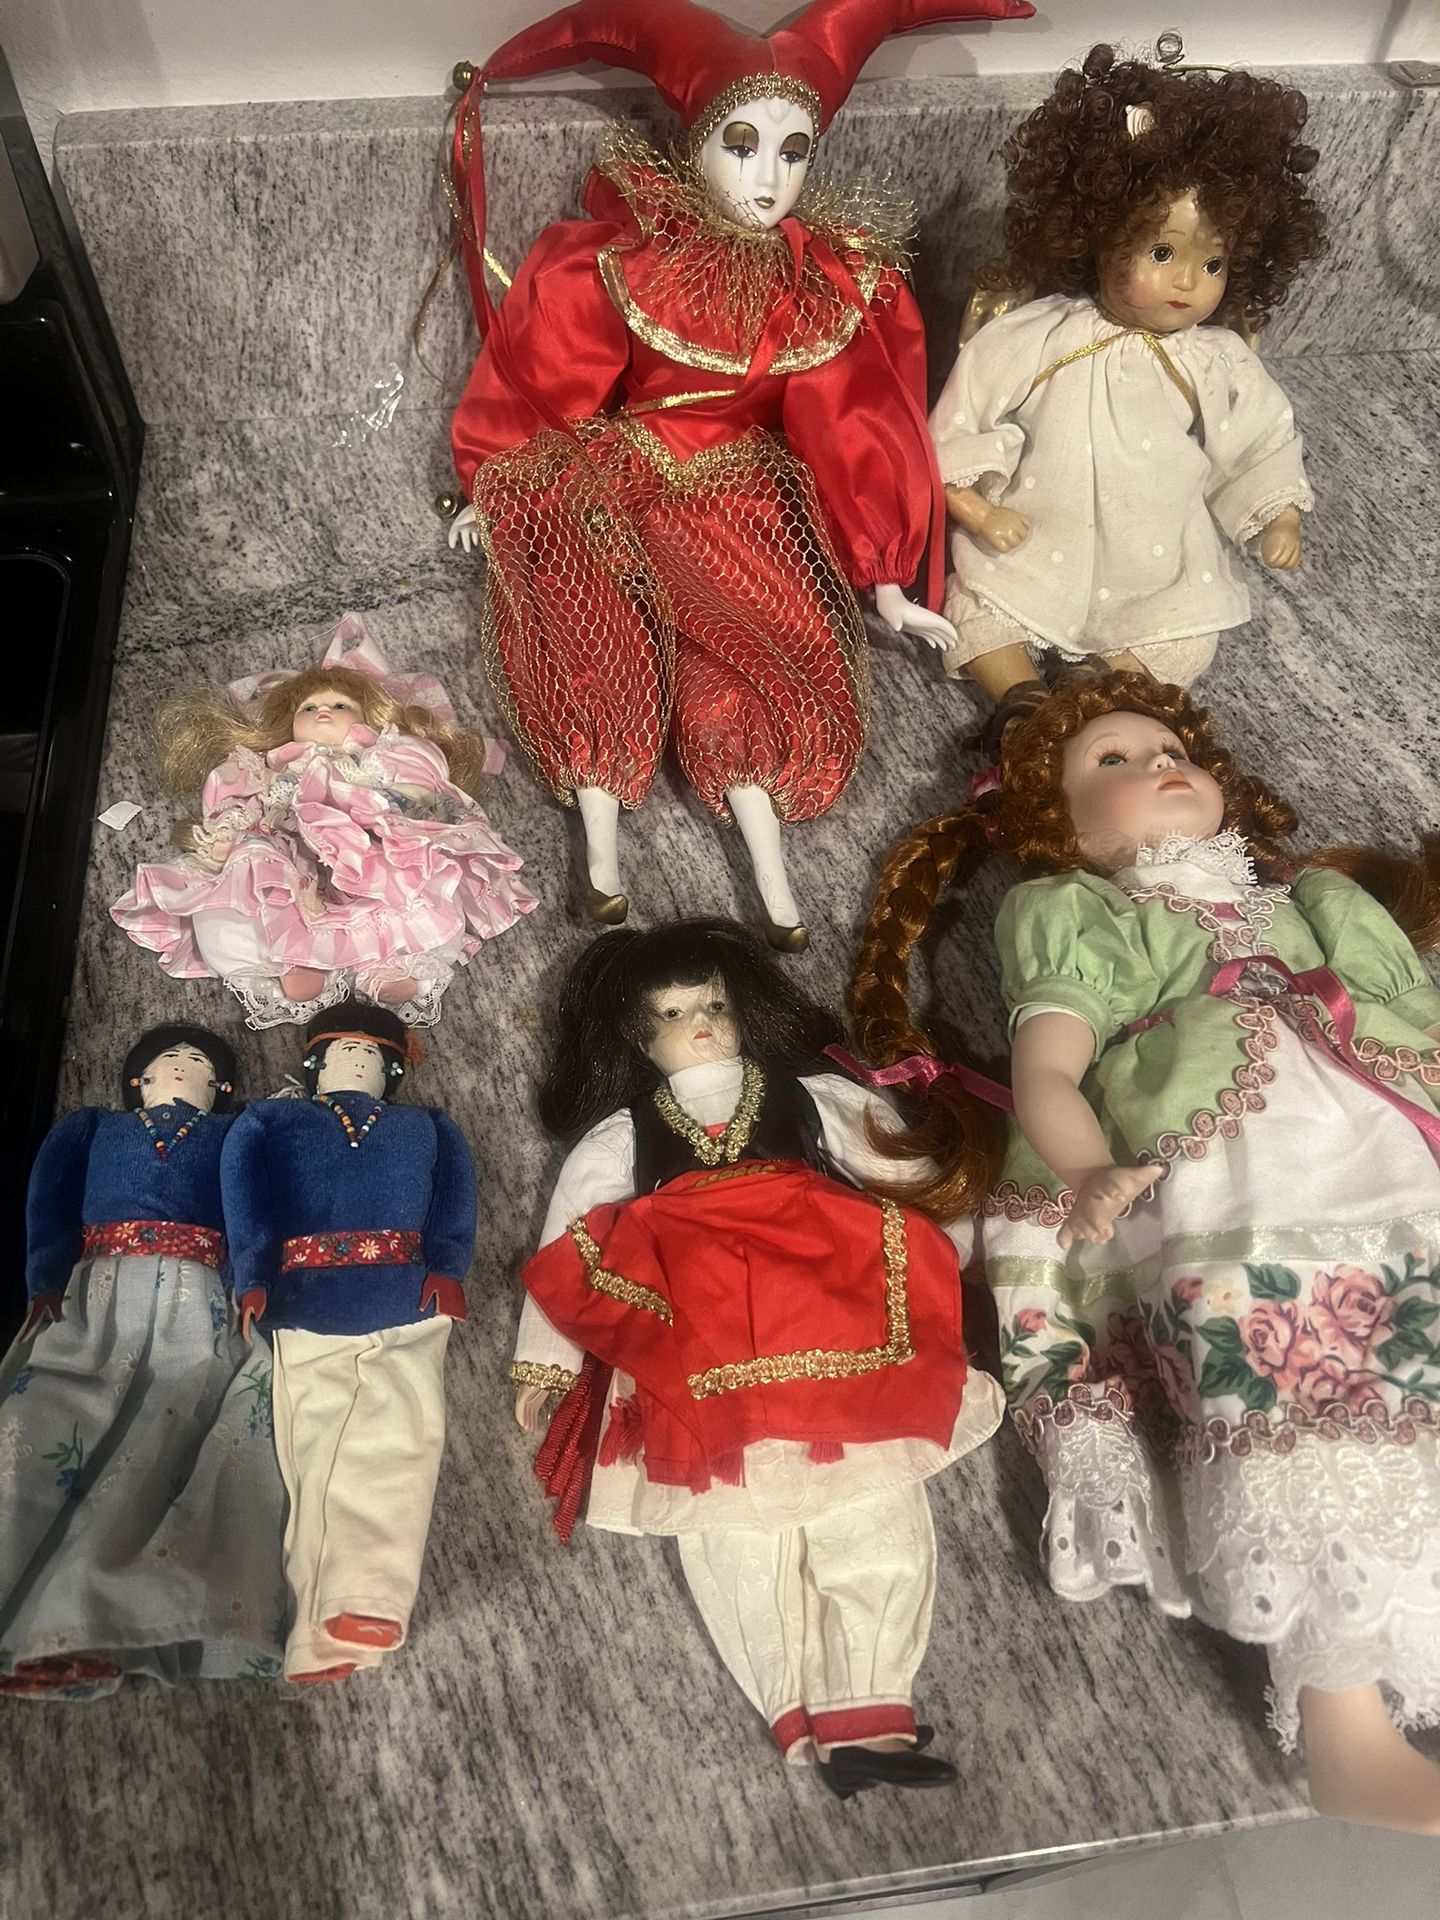 Vintage Doll Collection Including Ashton Drake Patricia Rose Doll. There Are Seven Dolls Included.